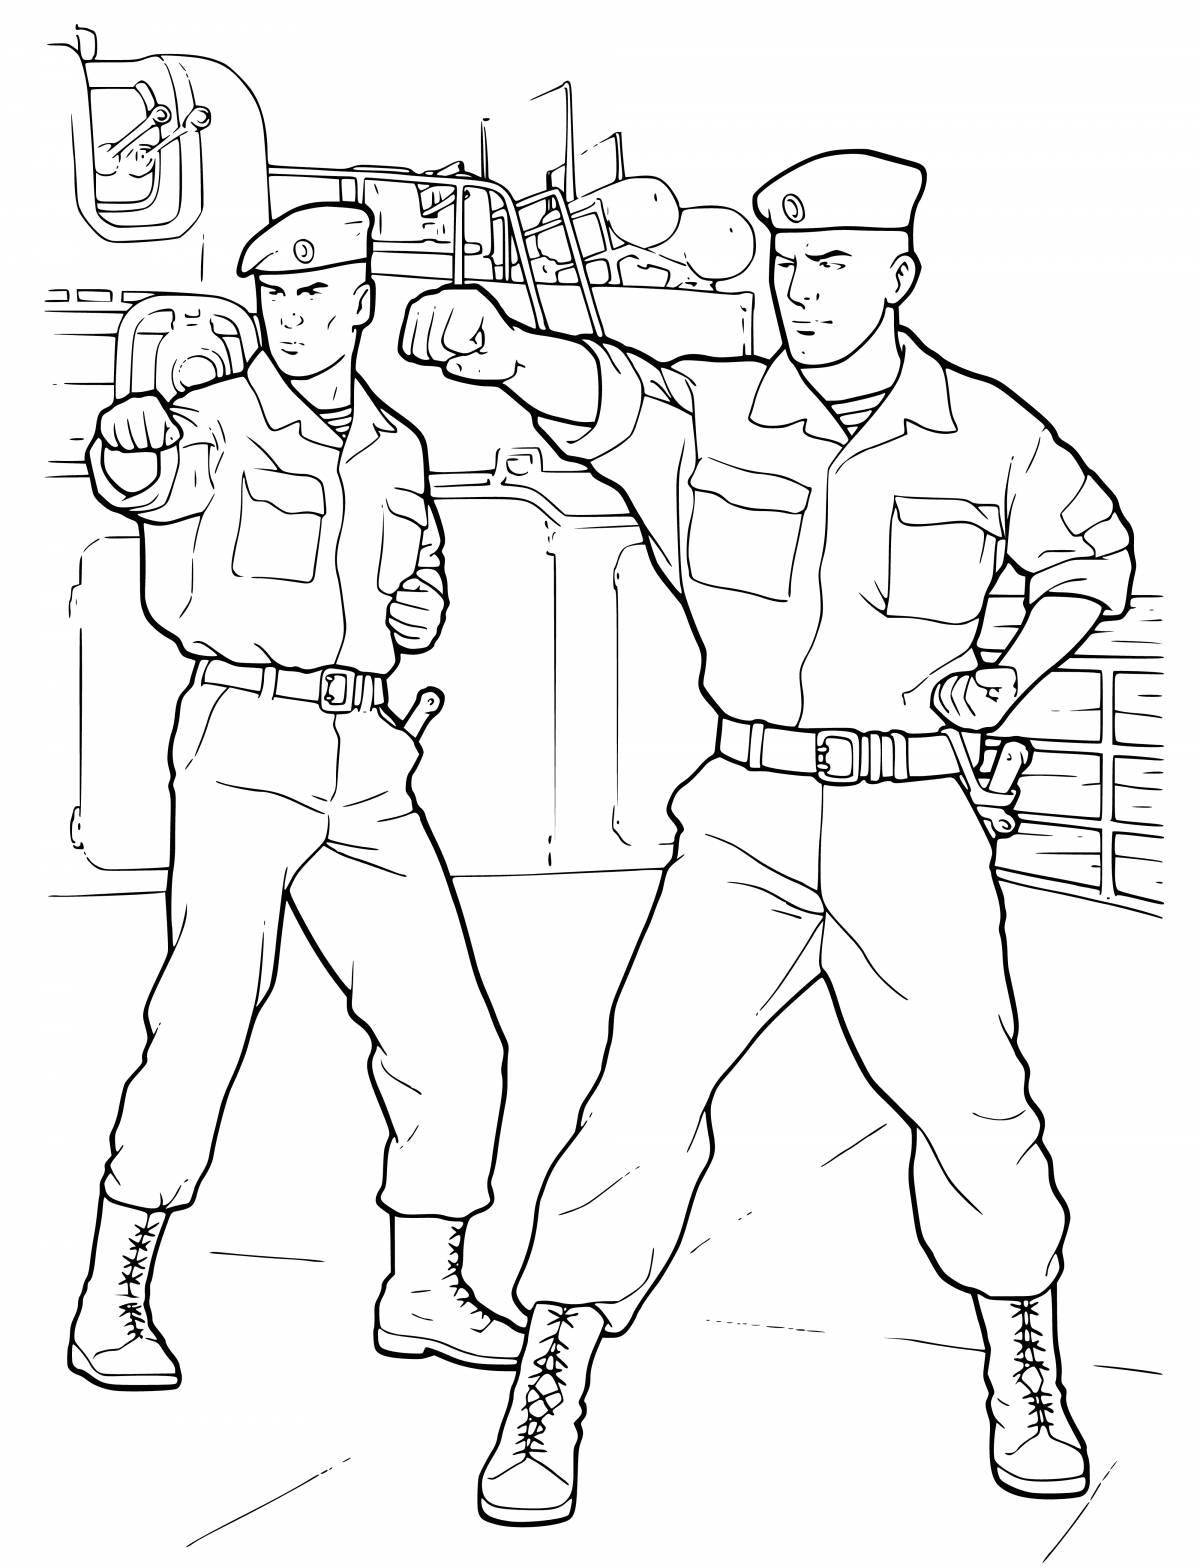 Cute military drawing for kids